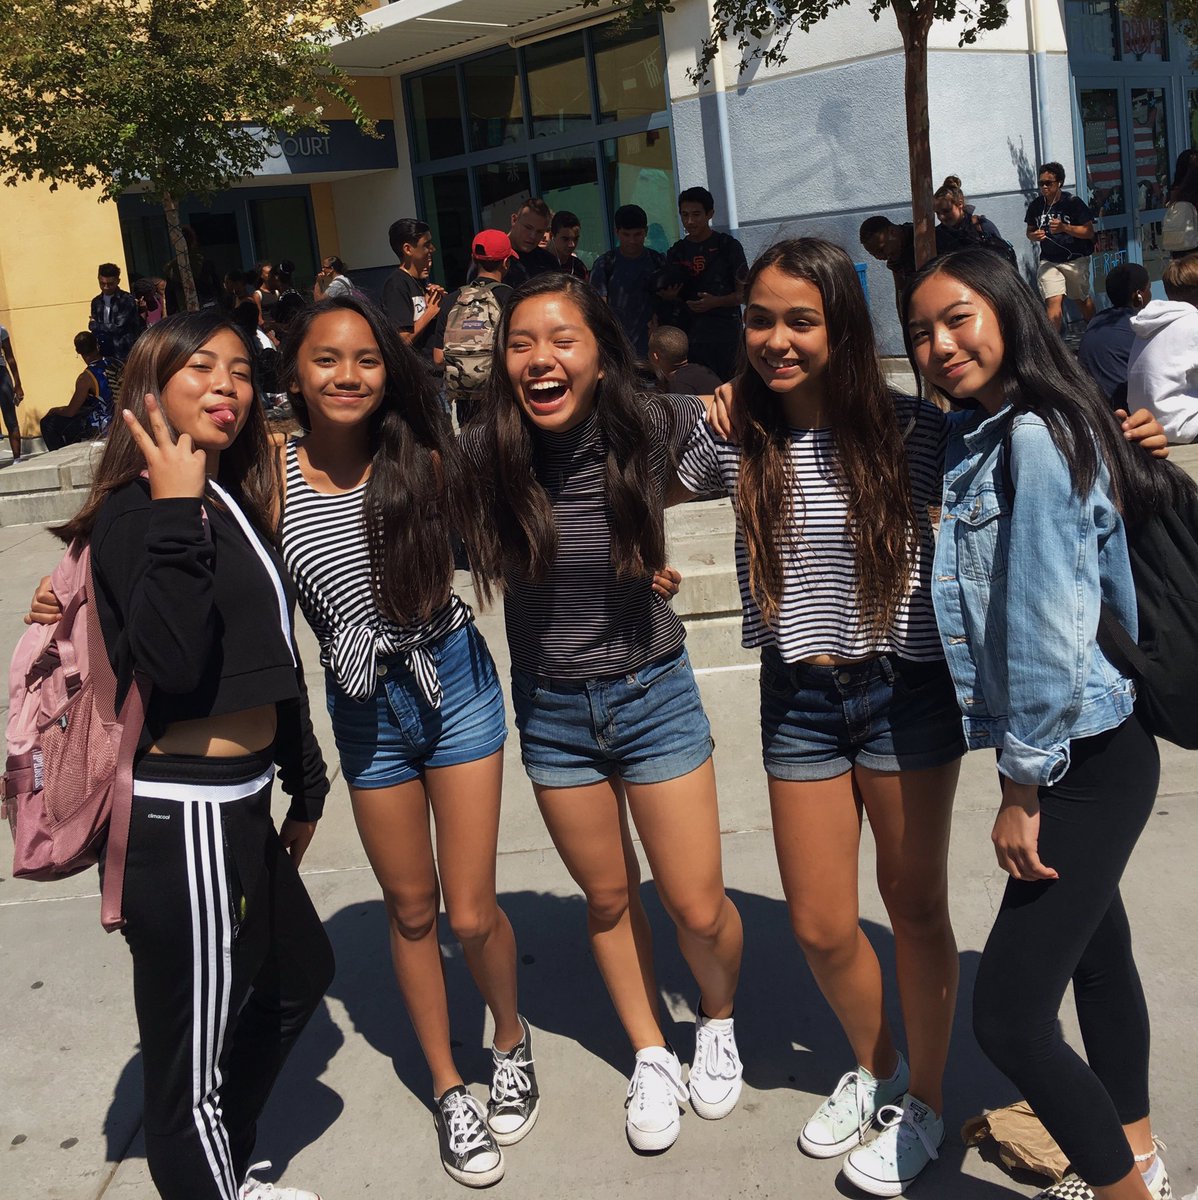 forgot to post from yesterdays spirit day oops but we color coordinated and called it twinning!1!1 #chillinwiththehomies